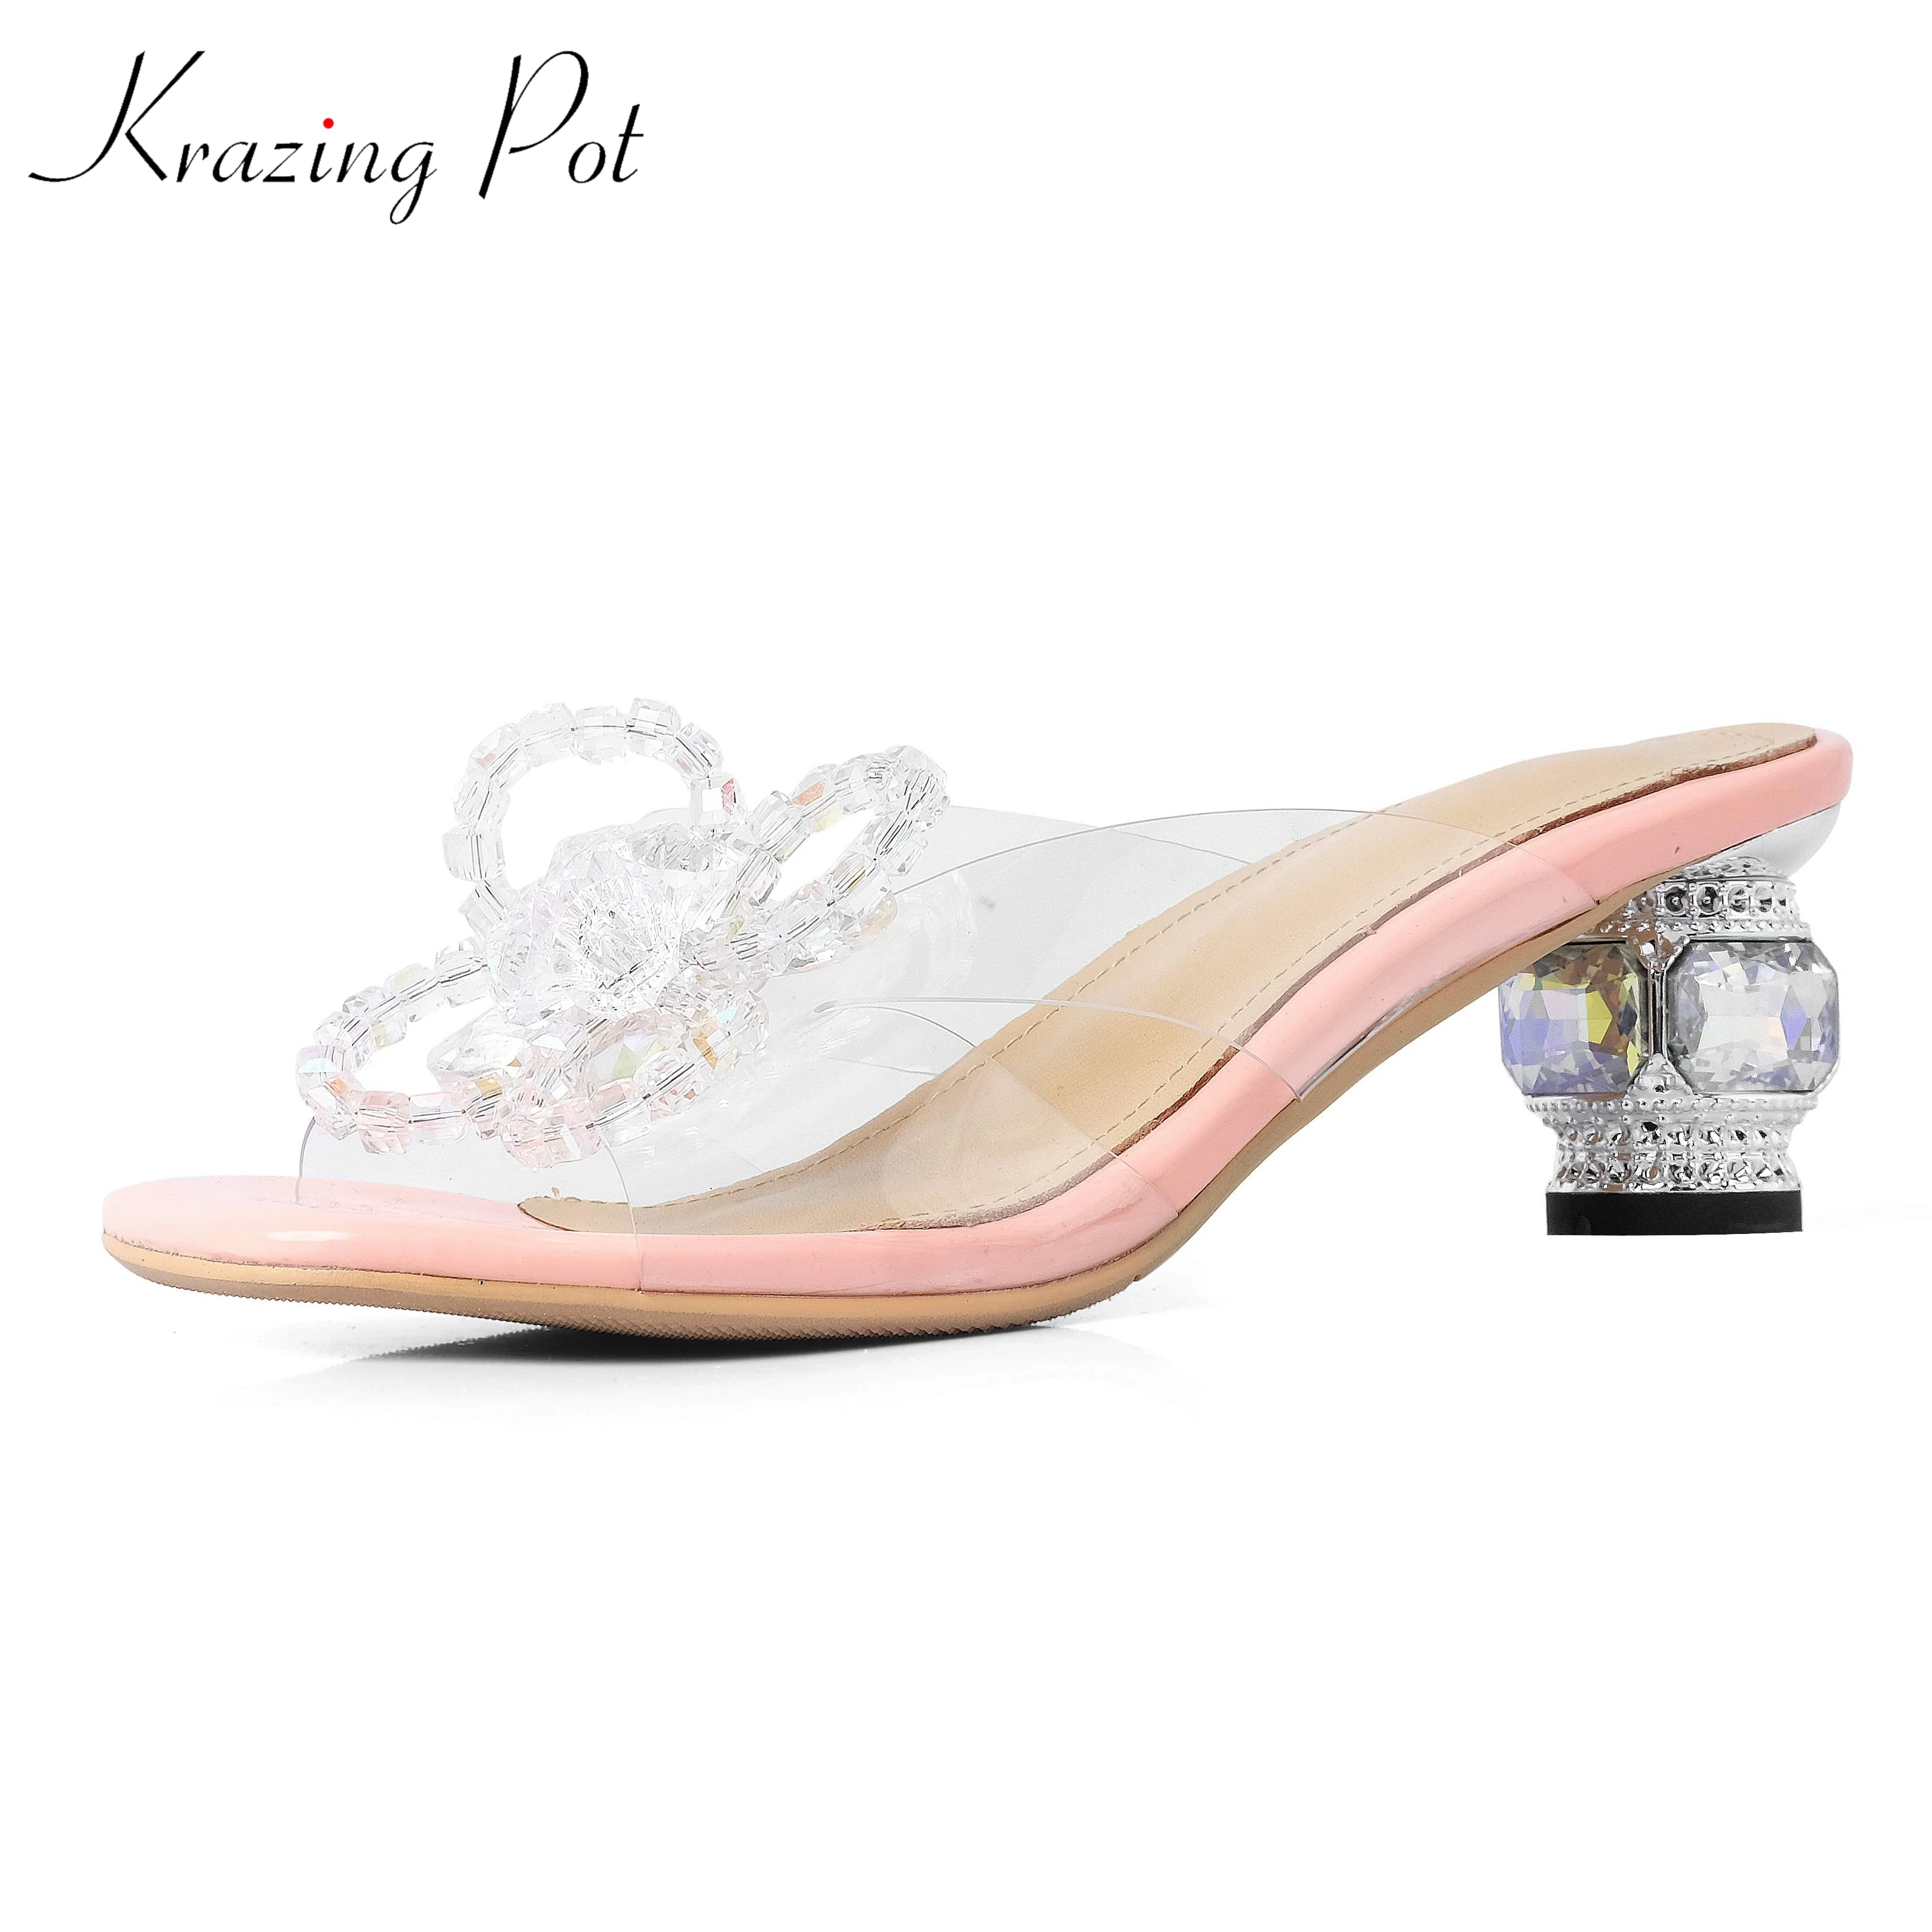 

Krazing Pot plastic PVC natural leather peep toe crystal strange style med heels summer mules handmade butterfly-knot sandals